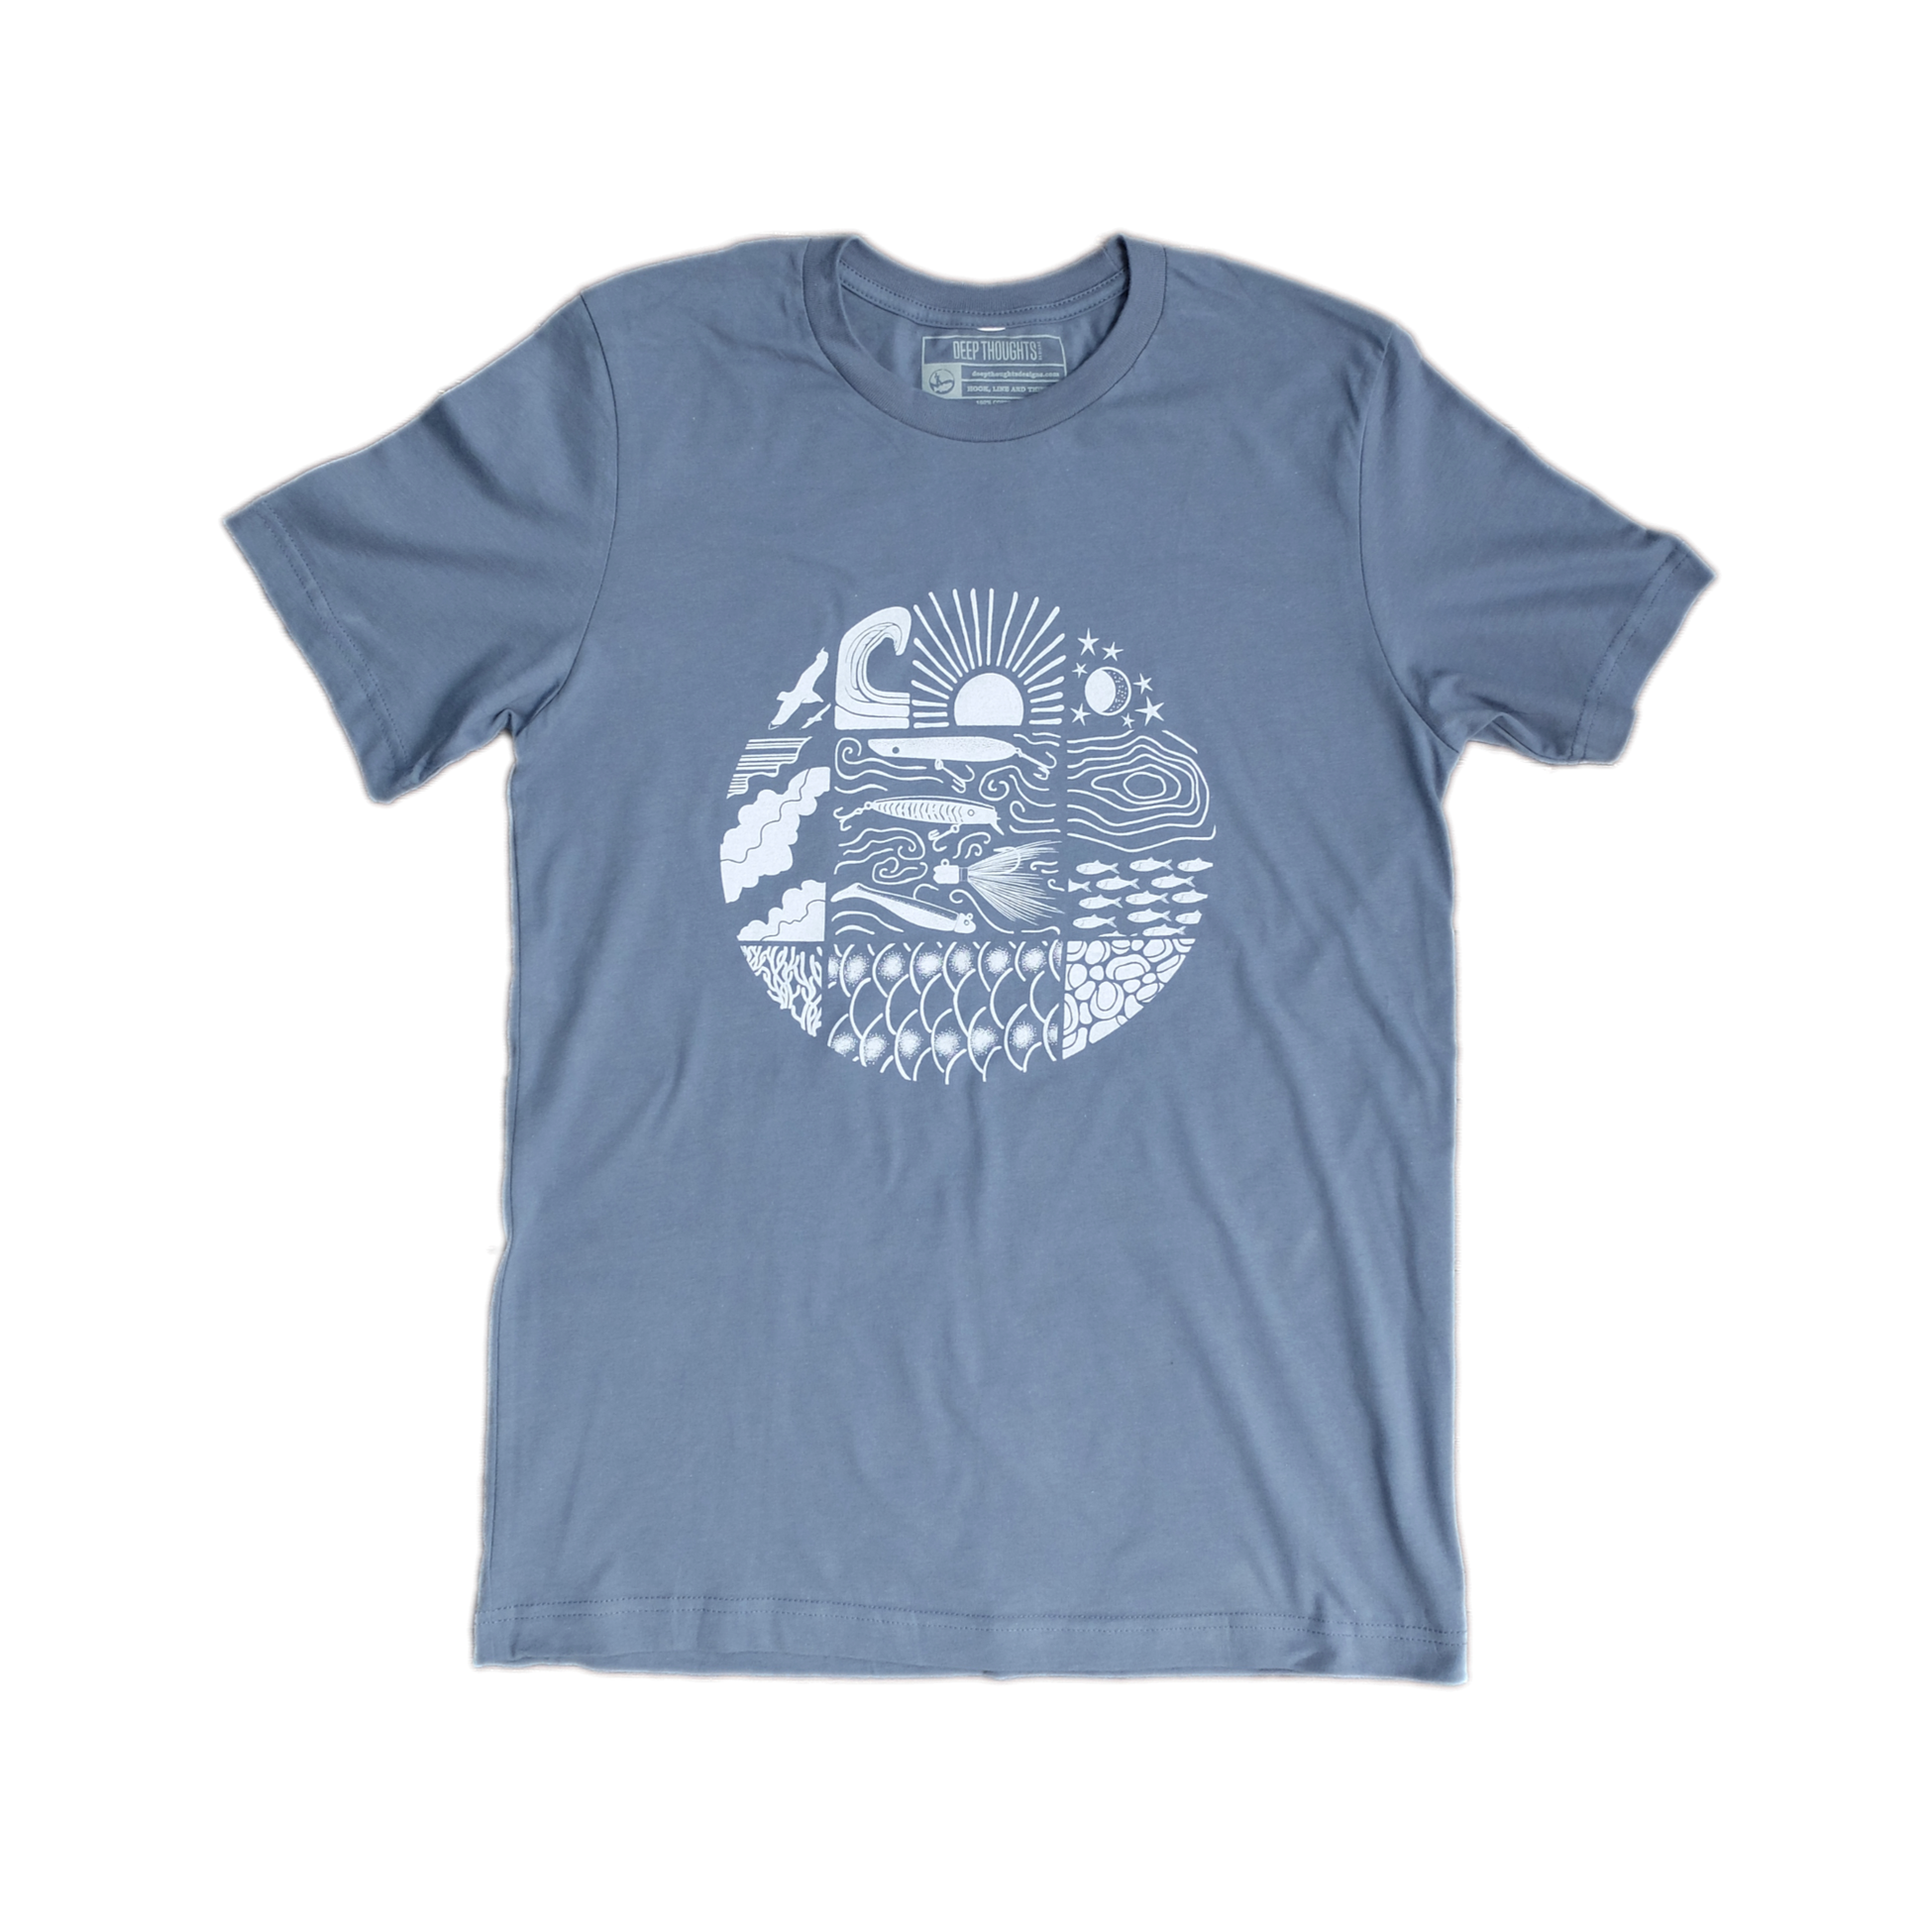 slate blue cotton t-shirt with white circular design showing multiple boating and fishing sights